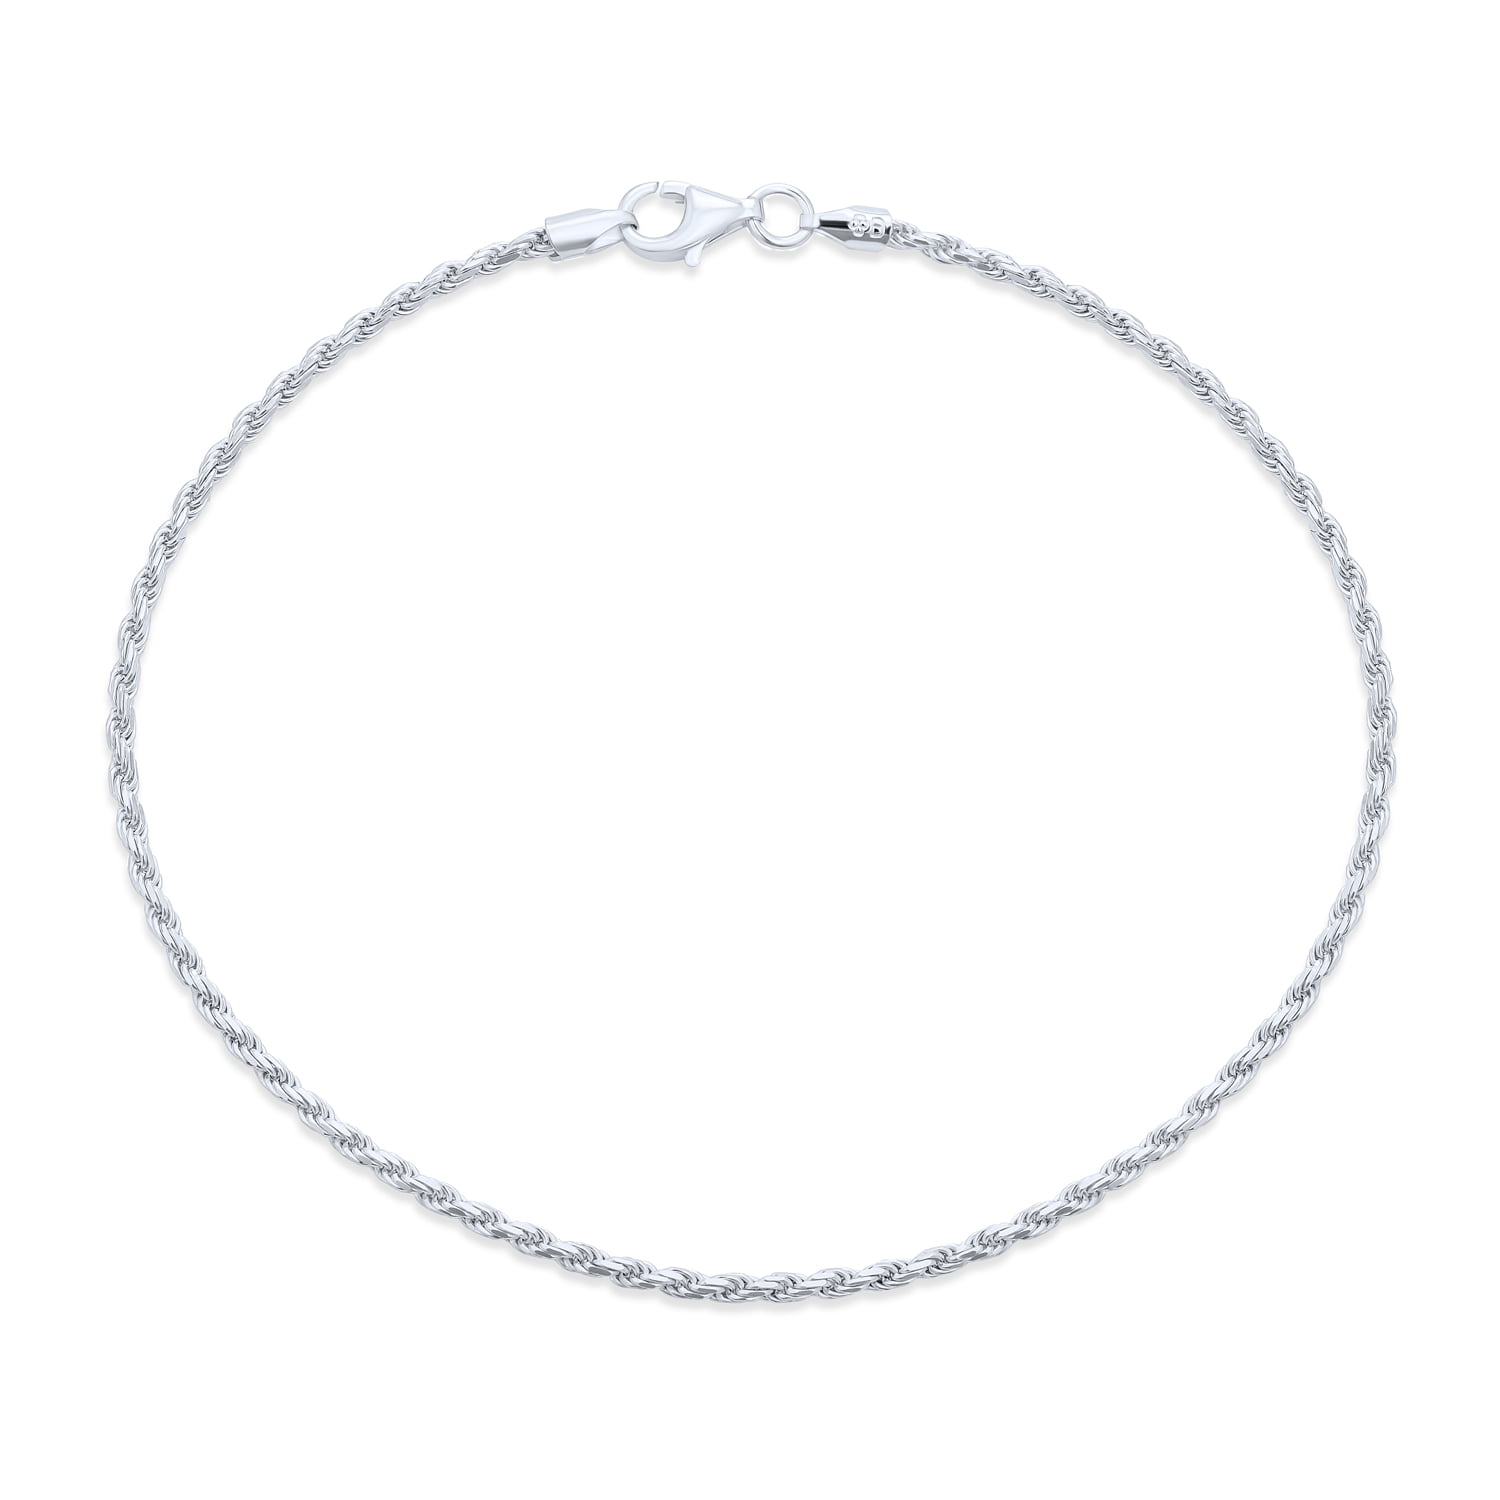 Bling Jewelry .925 Sterling Silver 9 Inch Strong Cable Rope Chain